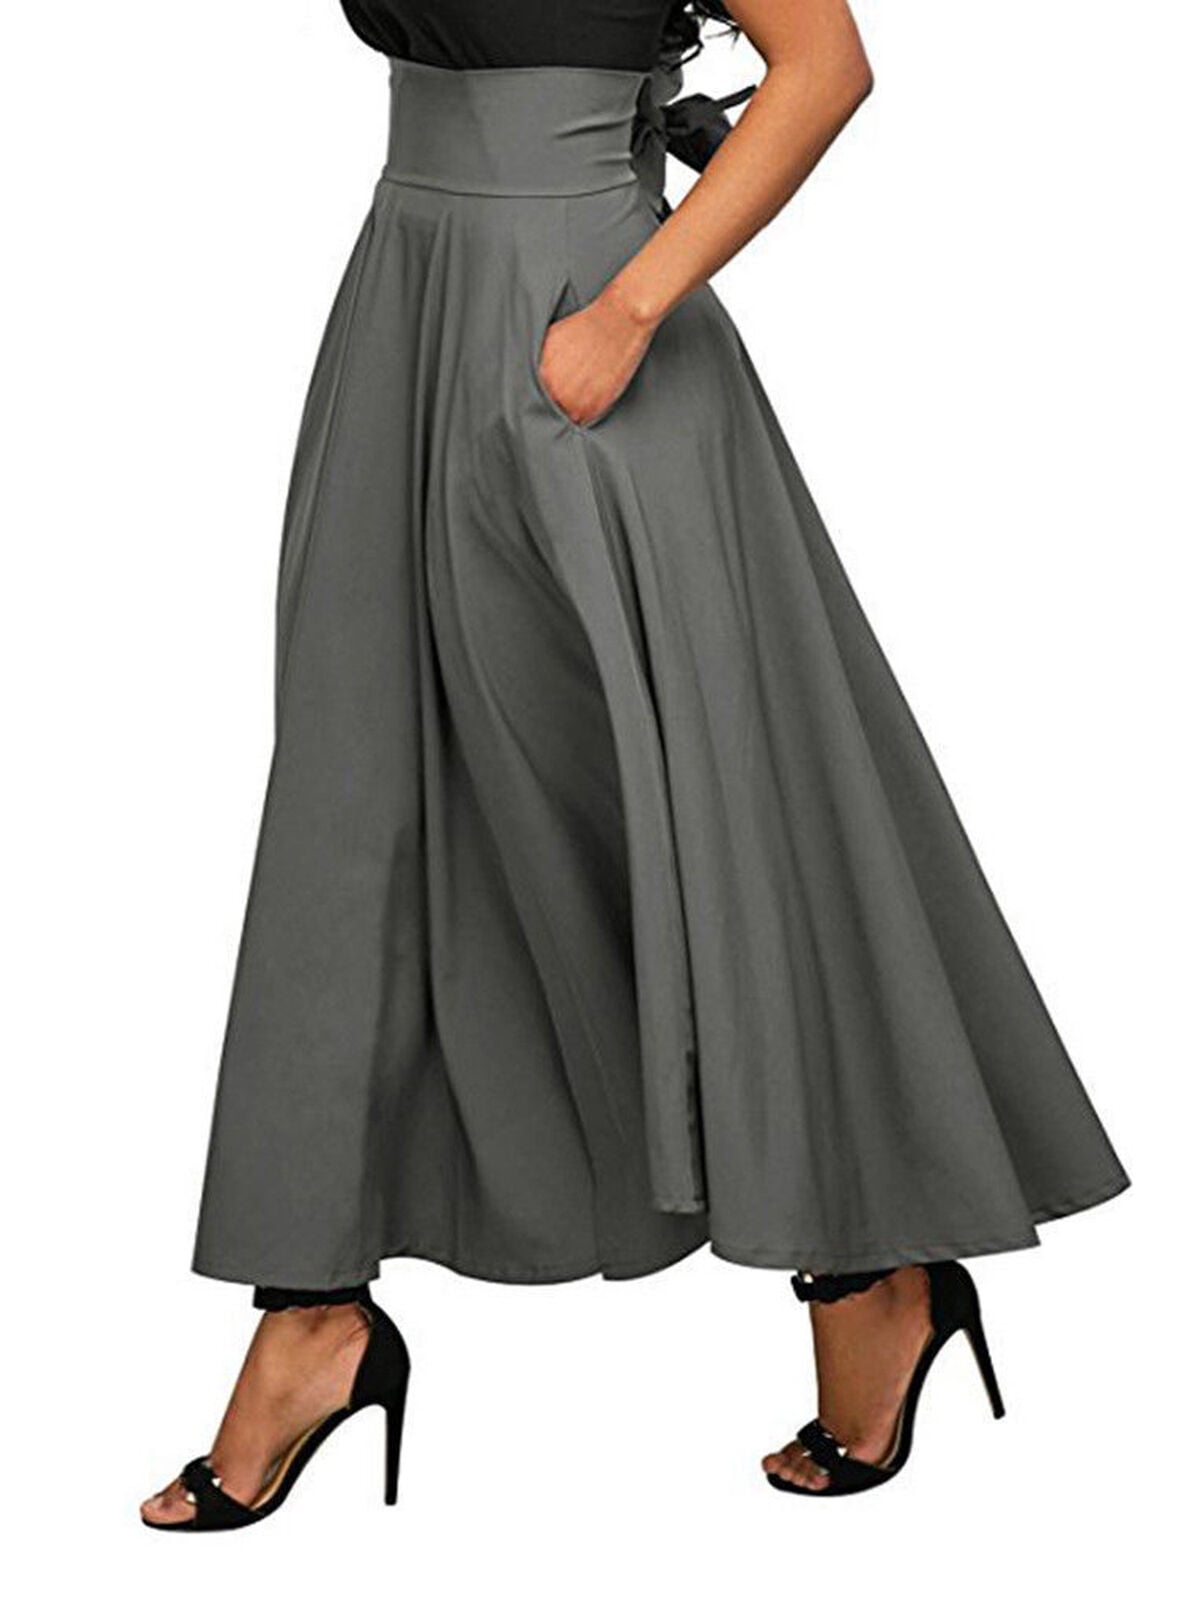 First Fashion Fly Spring and Summer New Asymmetric Waist Dress Female Round Neck Short Sleeve Long Skirt Gray